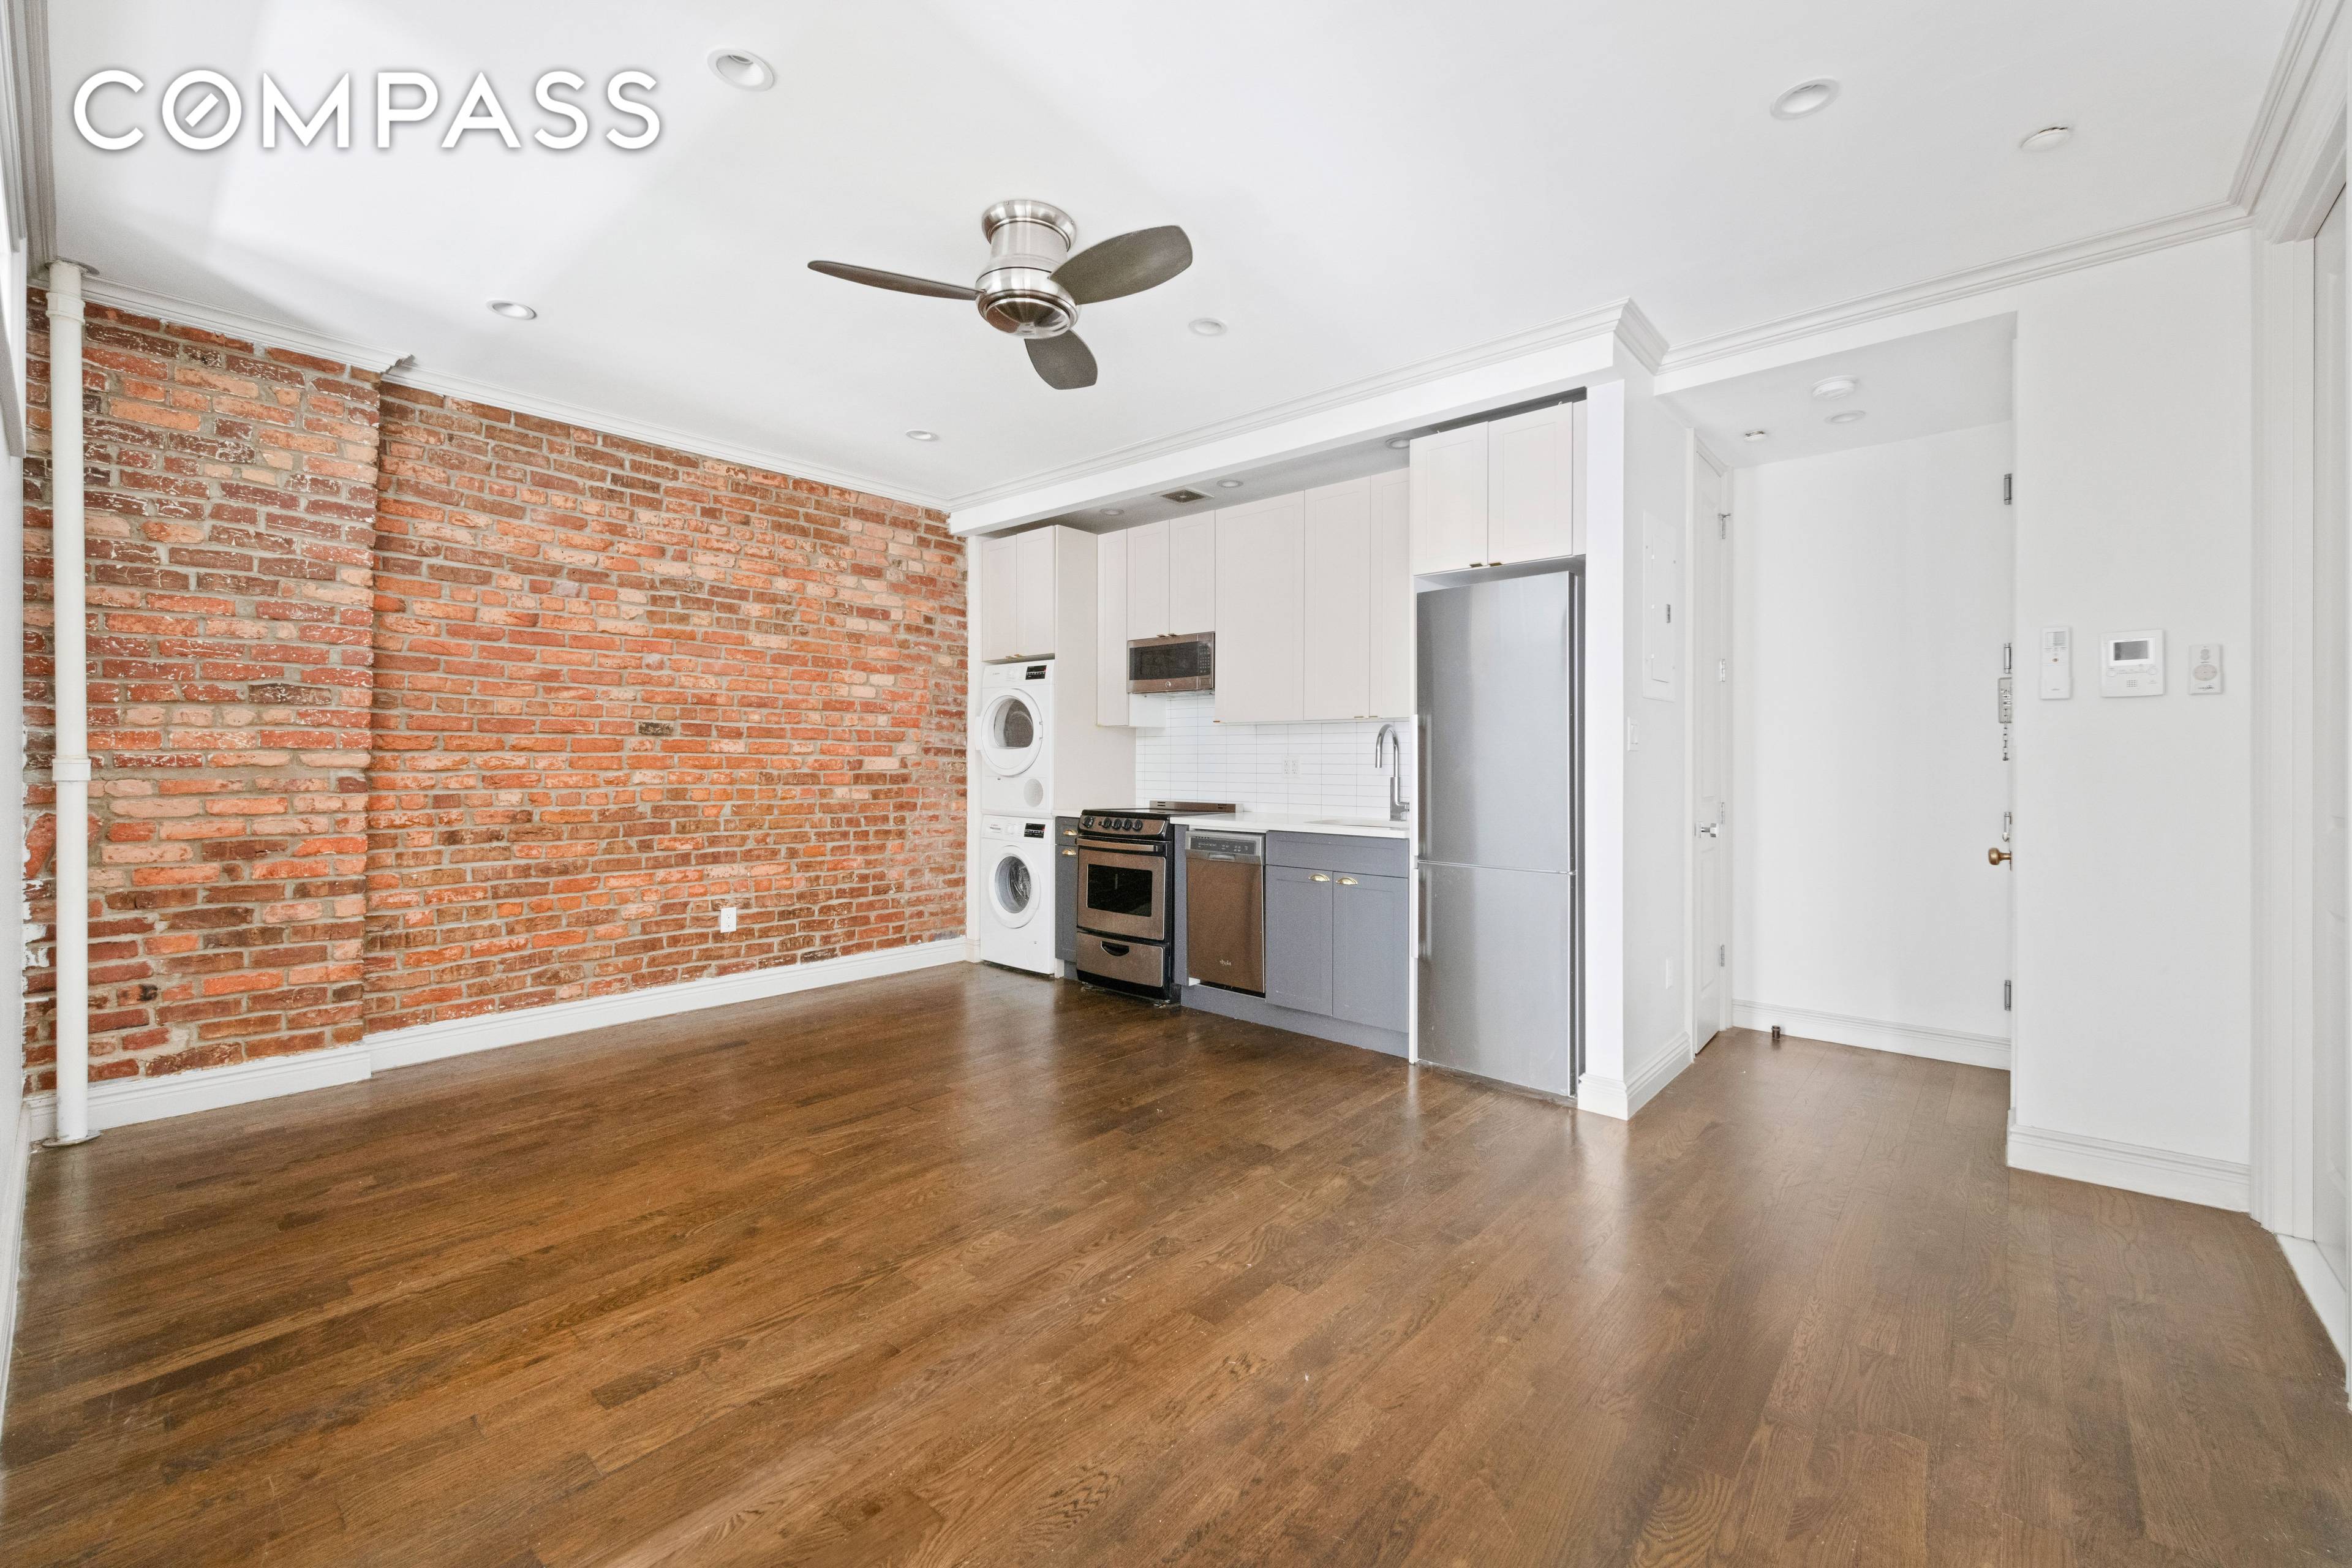 Welcome to apartment 3R at 51 West 11th Street located in the heart of Greenwich Village.